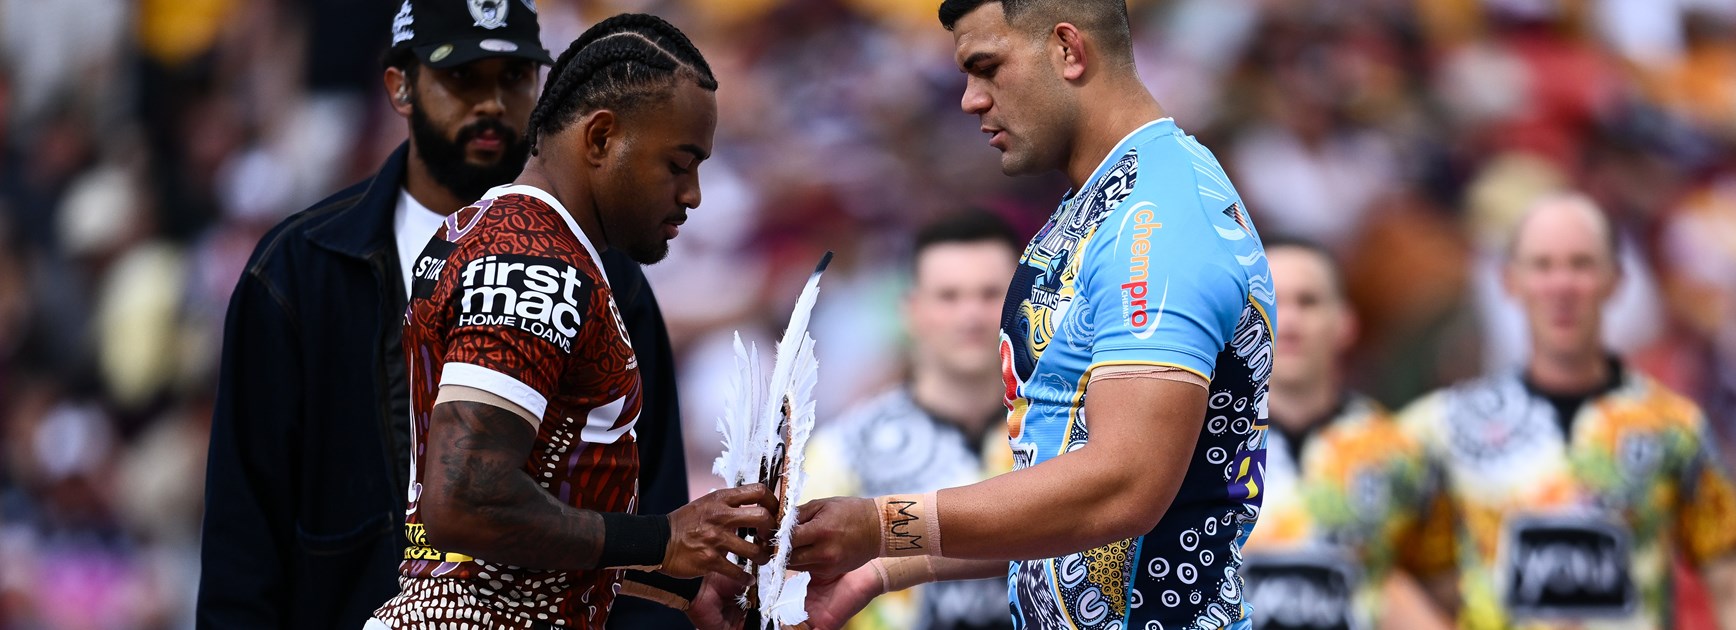 Now more than ever. Titans acknowledge Reconciliation Week